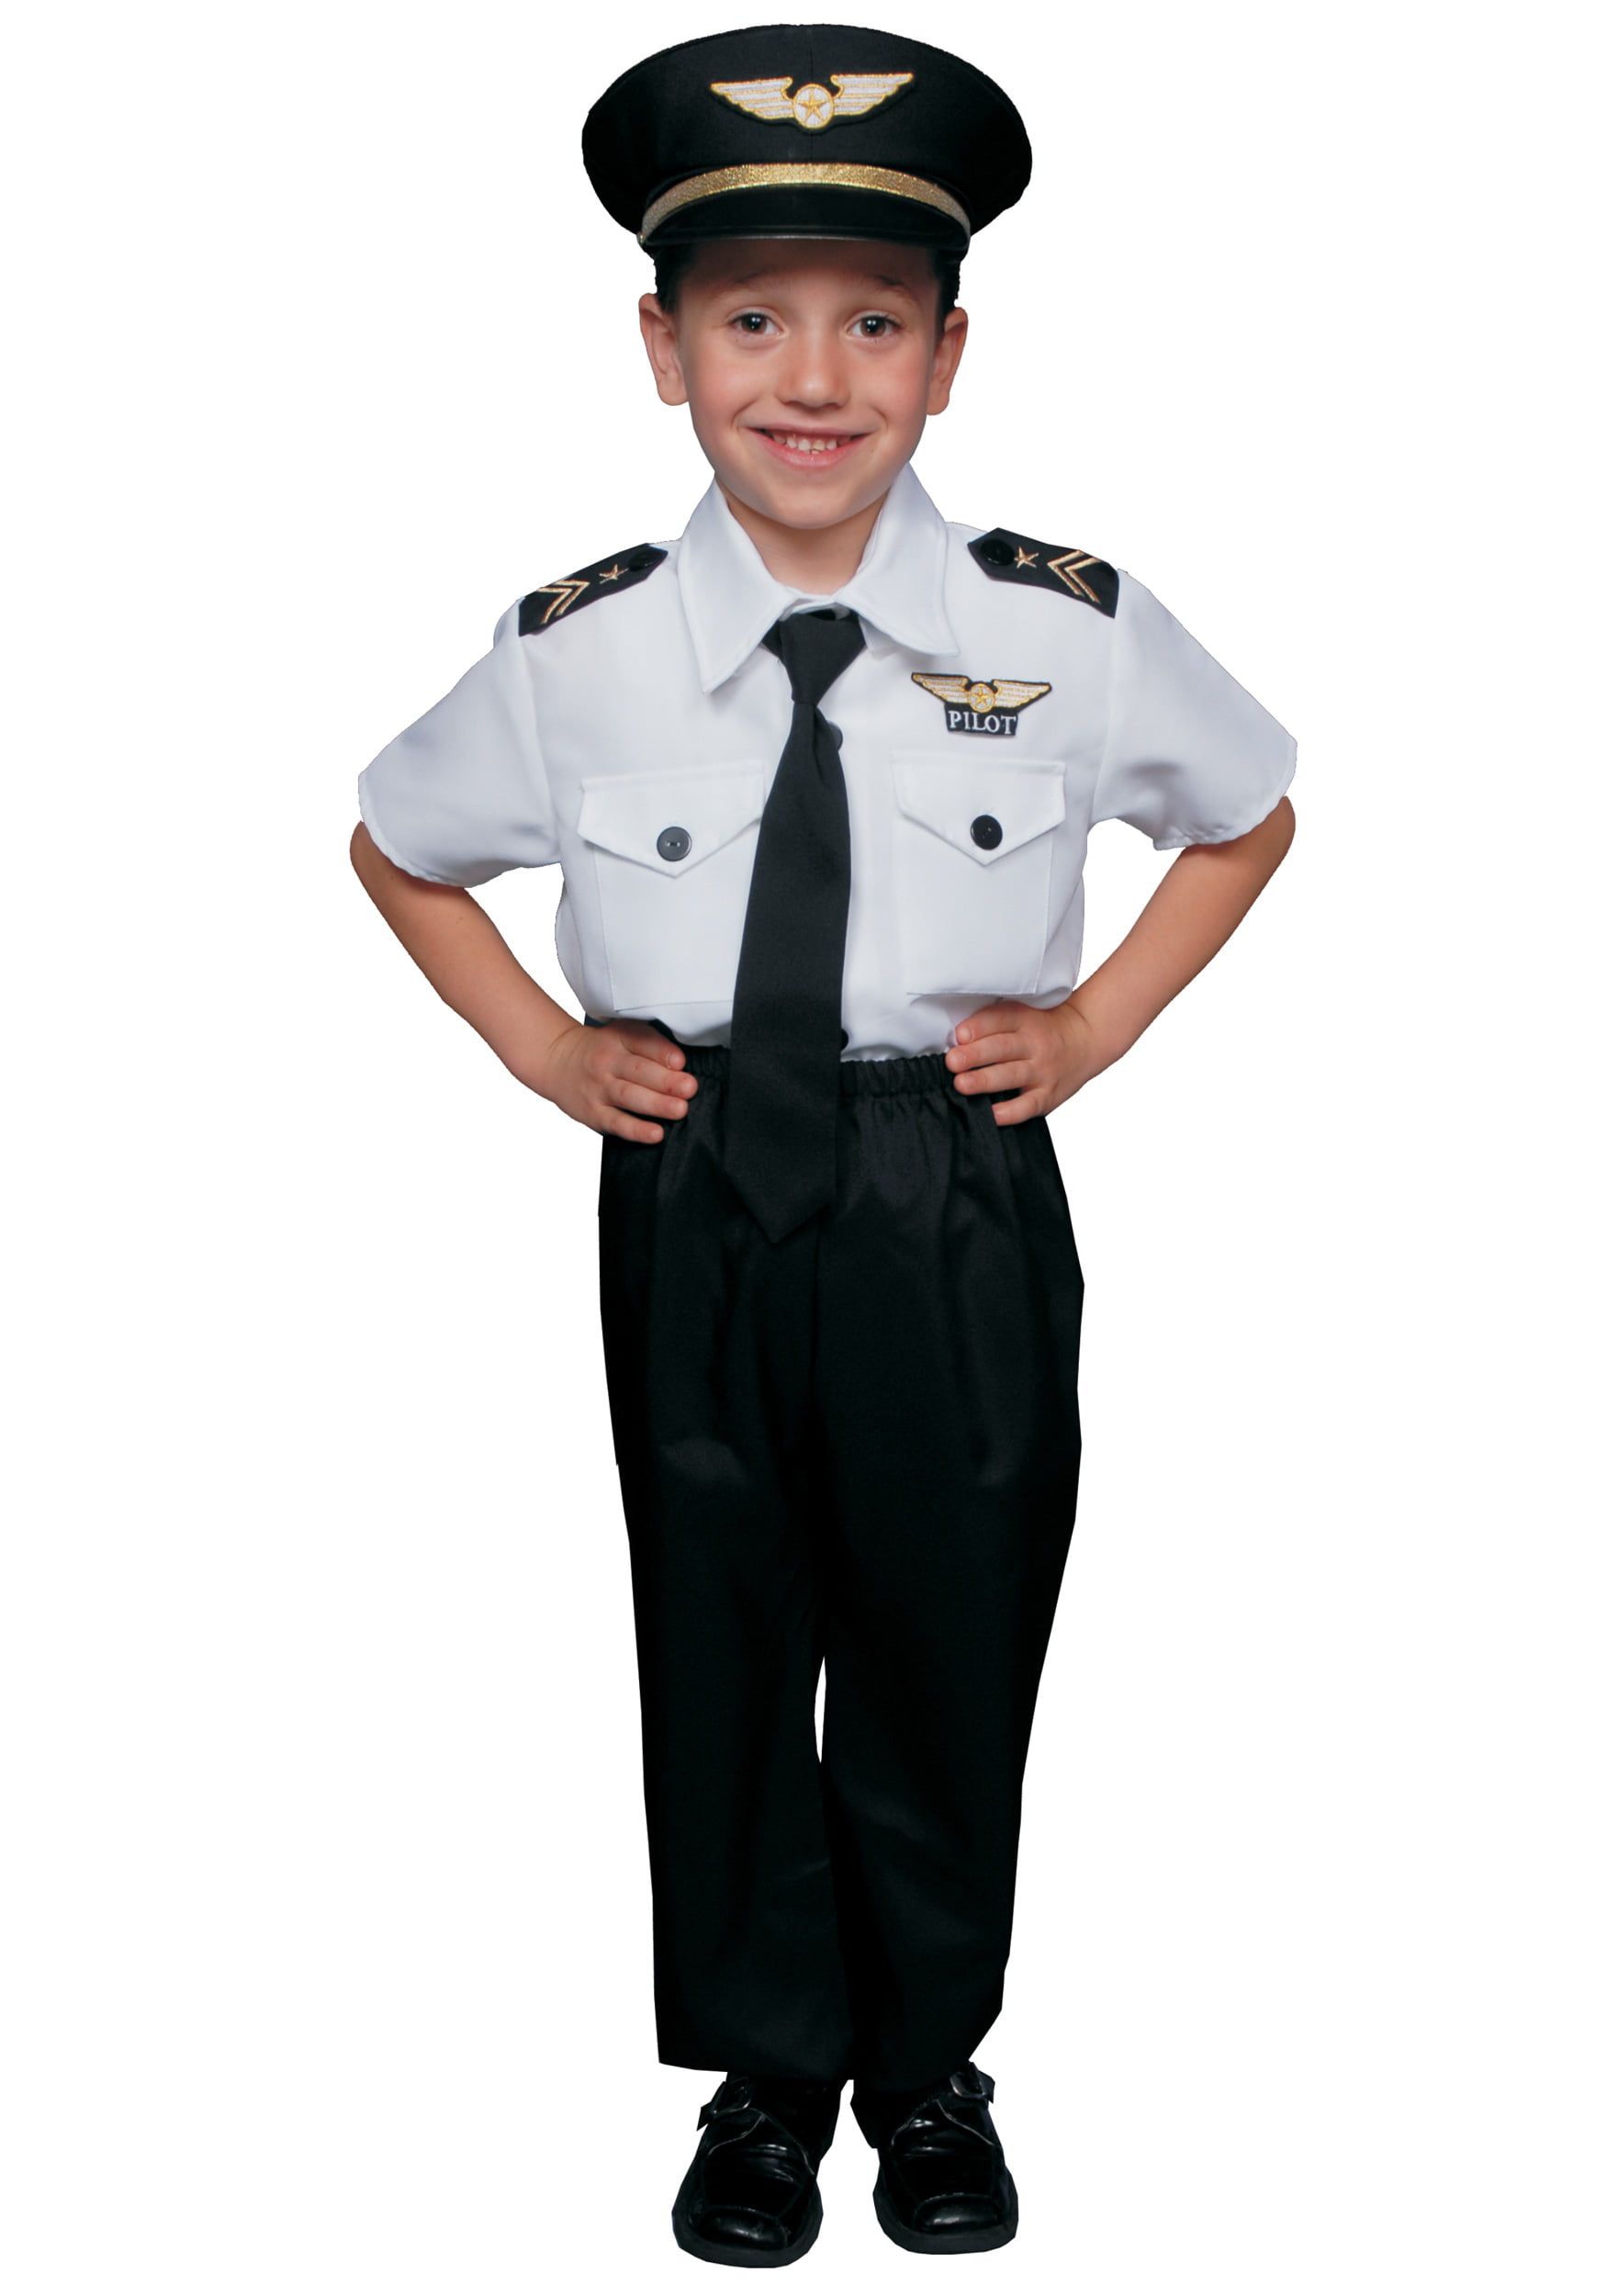 POLICE POLICEMAN COP CHILD BOY COSTUMES PATROL SECURITY GUARD KIDS OUTFIT 90265 